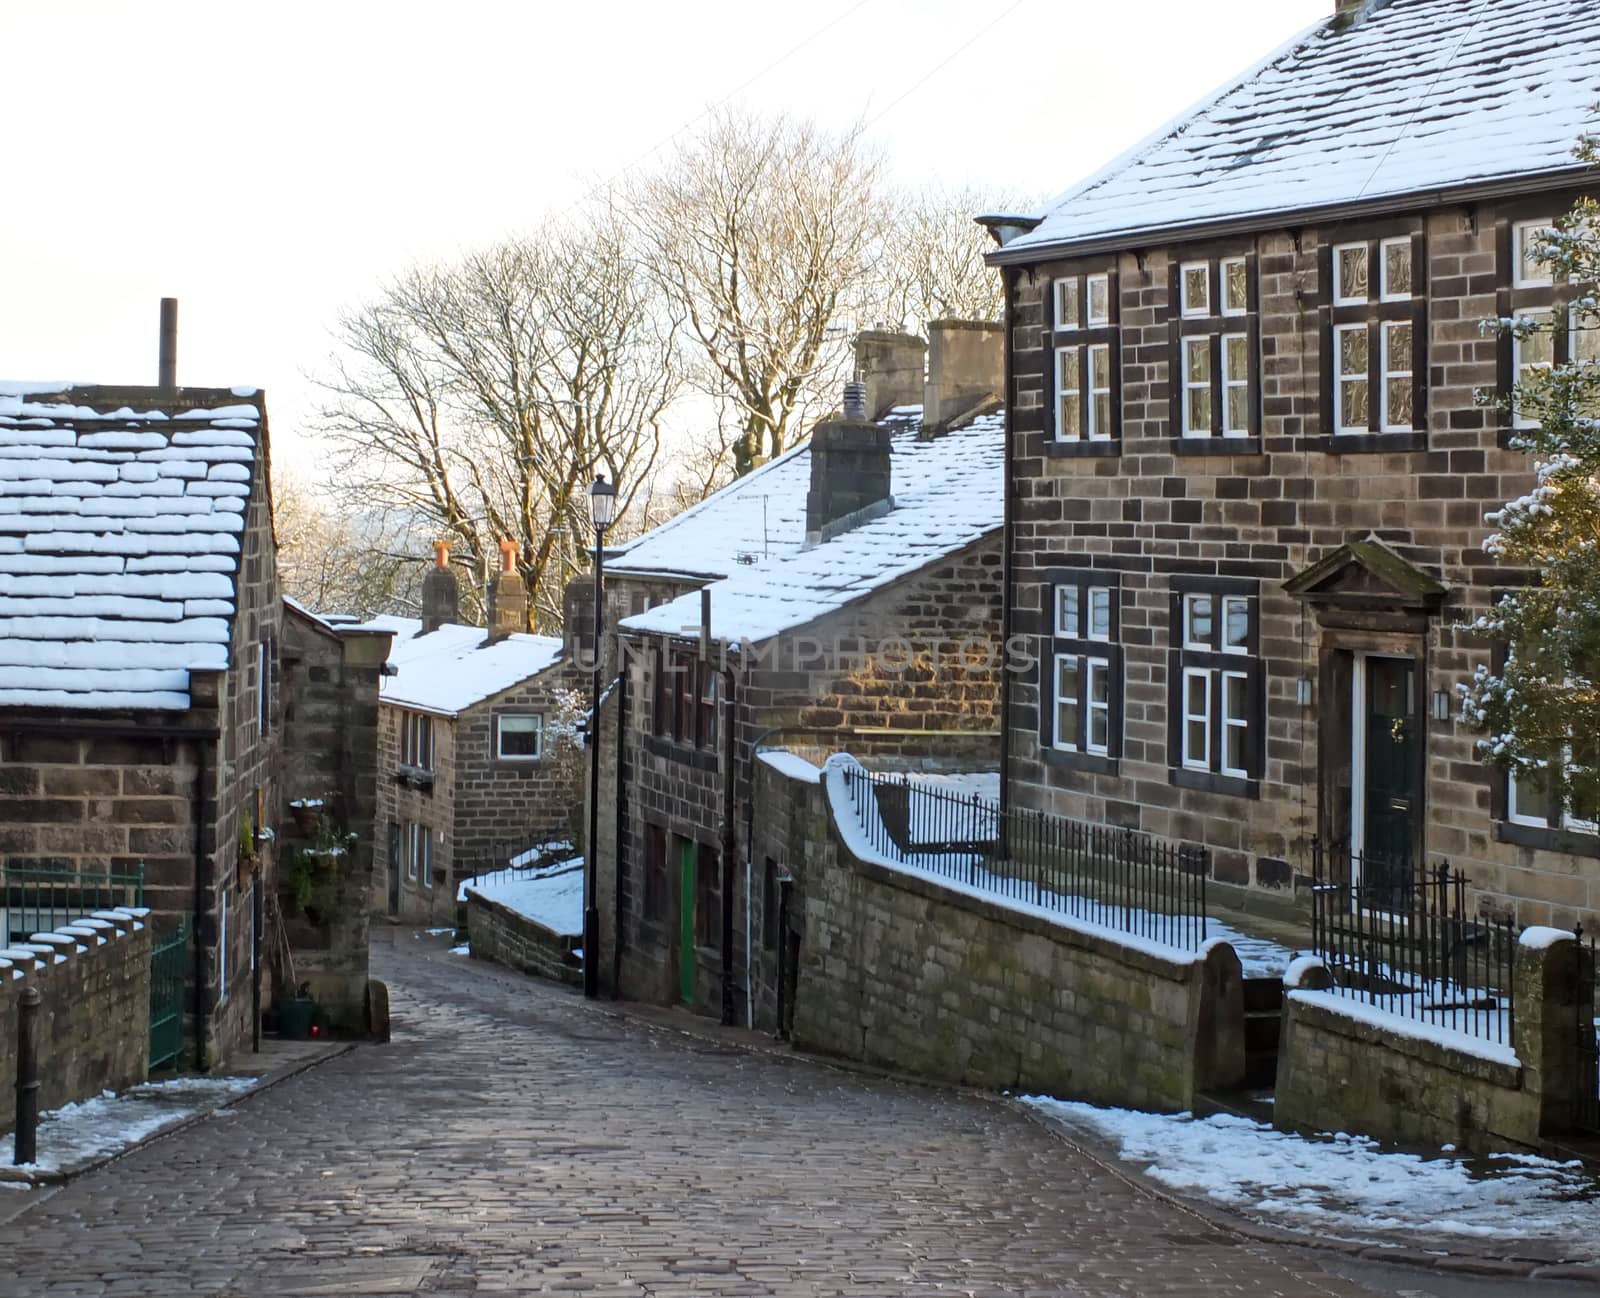 A scenic view of the main street in the village of heptonstall in west yorkshire with snow covering the old stone houses and pennine scenery visible in the background